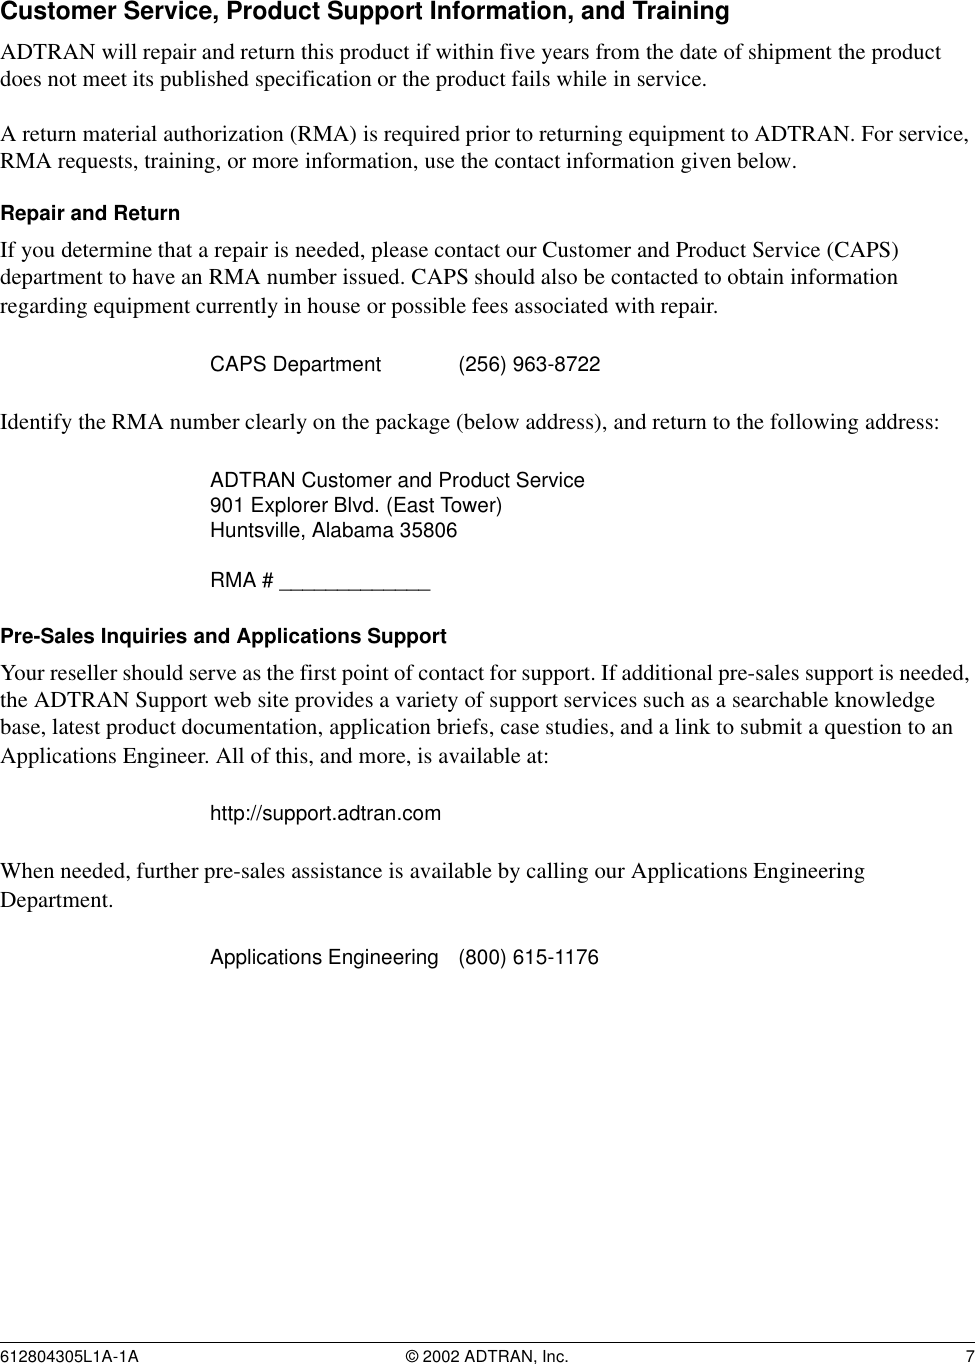 612804305L1A-1A © 2002 ADTRAN, Inc. 7Customer Service, Product Support Information, and TrainingADTRAN will repair and return this product if within five years from the date of shipment the product does not meet its published specification or the product fails while in service. A return material authorization (RMA) is required prior to returning equipment to ADTRAN. For service, RMA requests, training, or more information, use the contact information given below.Repair and ReturnIf you determine that a repair is needed, please contact our Customer and Product Service (CAPS) department to have an RMA number issued. CAPS should also be contacted to obtain information regarding equipment currently in house or possible fees associated with repair.Identify the RMA number clearly on the package (below address), and return to the following address:Pre-Sales Inquiries and Applications SupportYour reseller should serve as the first point of contact for support. If additional pre-sales support is needed, the ADTRAN Support web site provides a variety of support services such as a searchable knowledge base, latest product documentation, application briefs, case studies, and a link to submit a question to an Applications Engineer. All of this, and more, is available at:When needed, further pre-sales assistance is available by calling our Applications Engineering Department.CAPS Department (256) 963-8722 ADTRAN Customer and Product Service901 Explorer Blvd. (East Tower)Huntsville, Alabama 35806RMA # _____________http://support.adtran.comApplications Engineering (800) 615-1176 